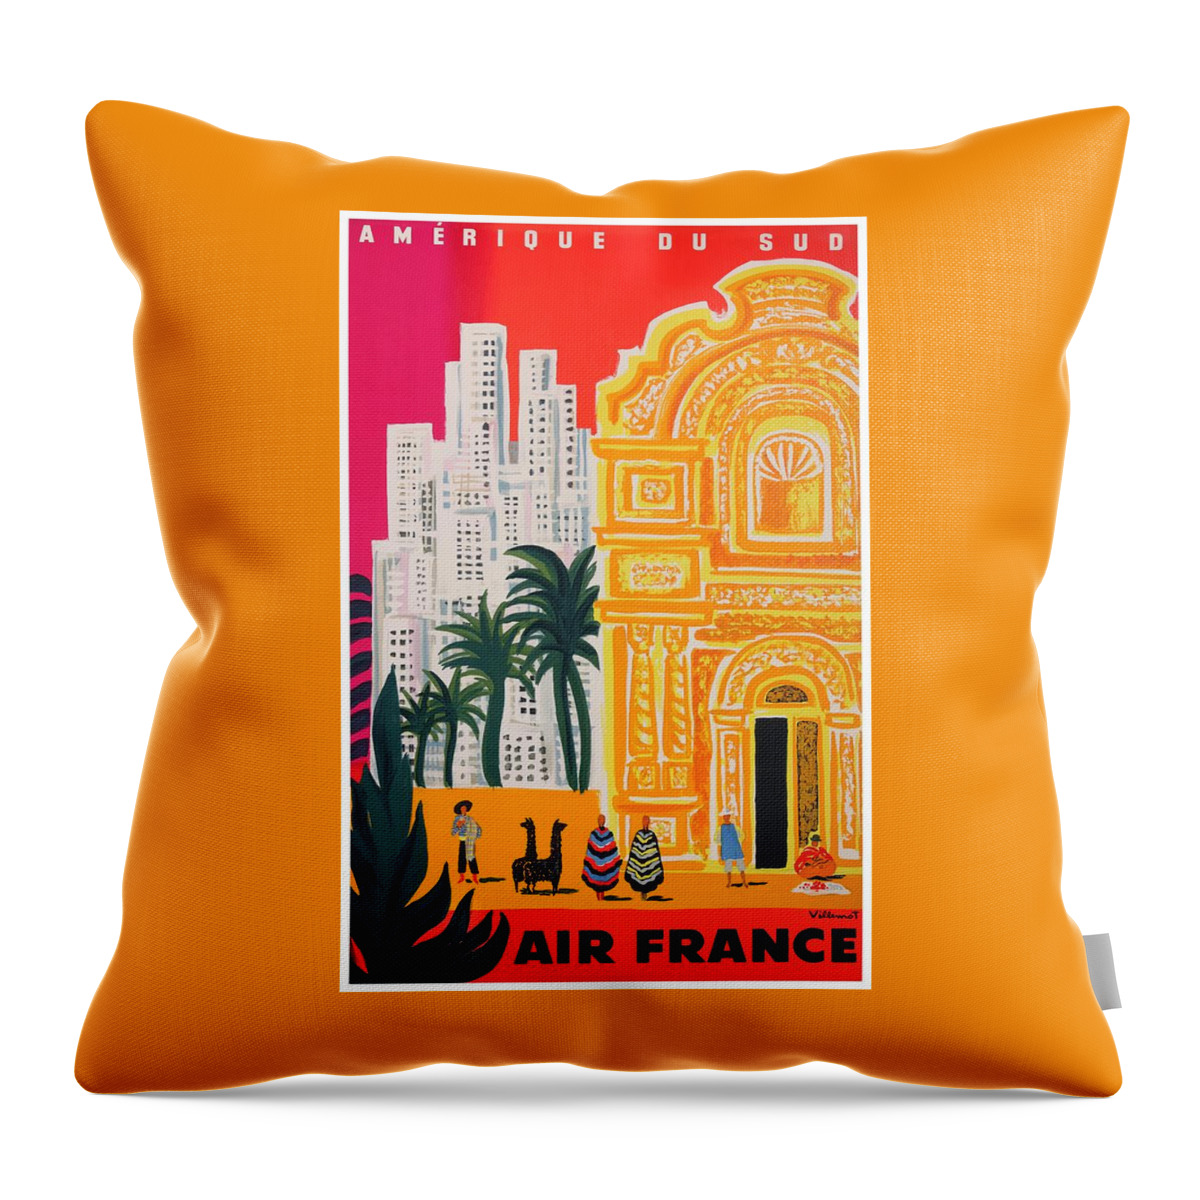 Air France Throw Pillow featuring the digital art 1958 Air France Amerique du Sud Travel Poster by Retro Graphics